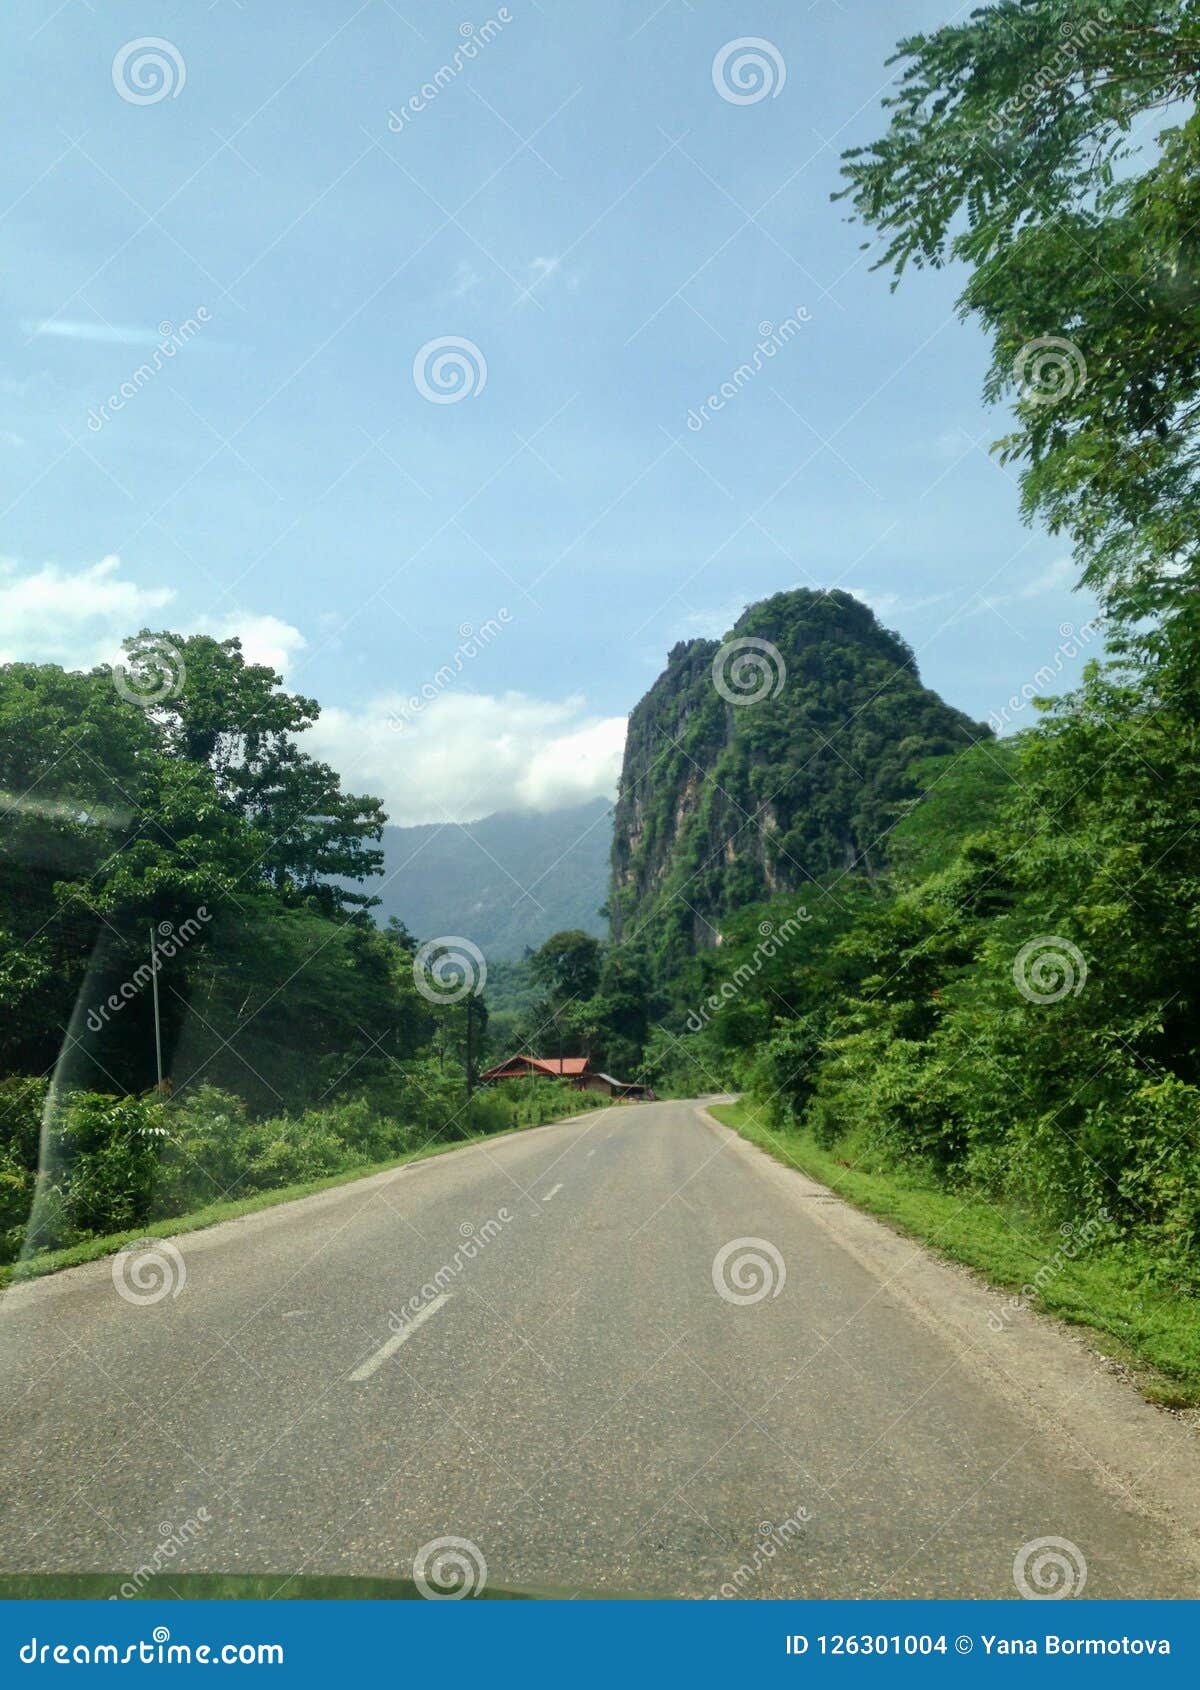 Road To the Green Mountains, Rural Area, Travel To Laos. Stock Photo ...